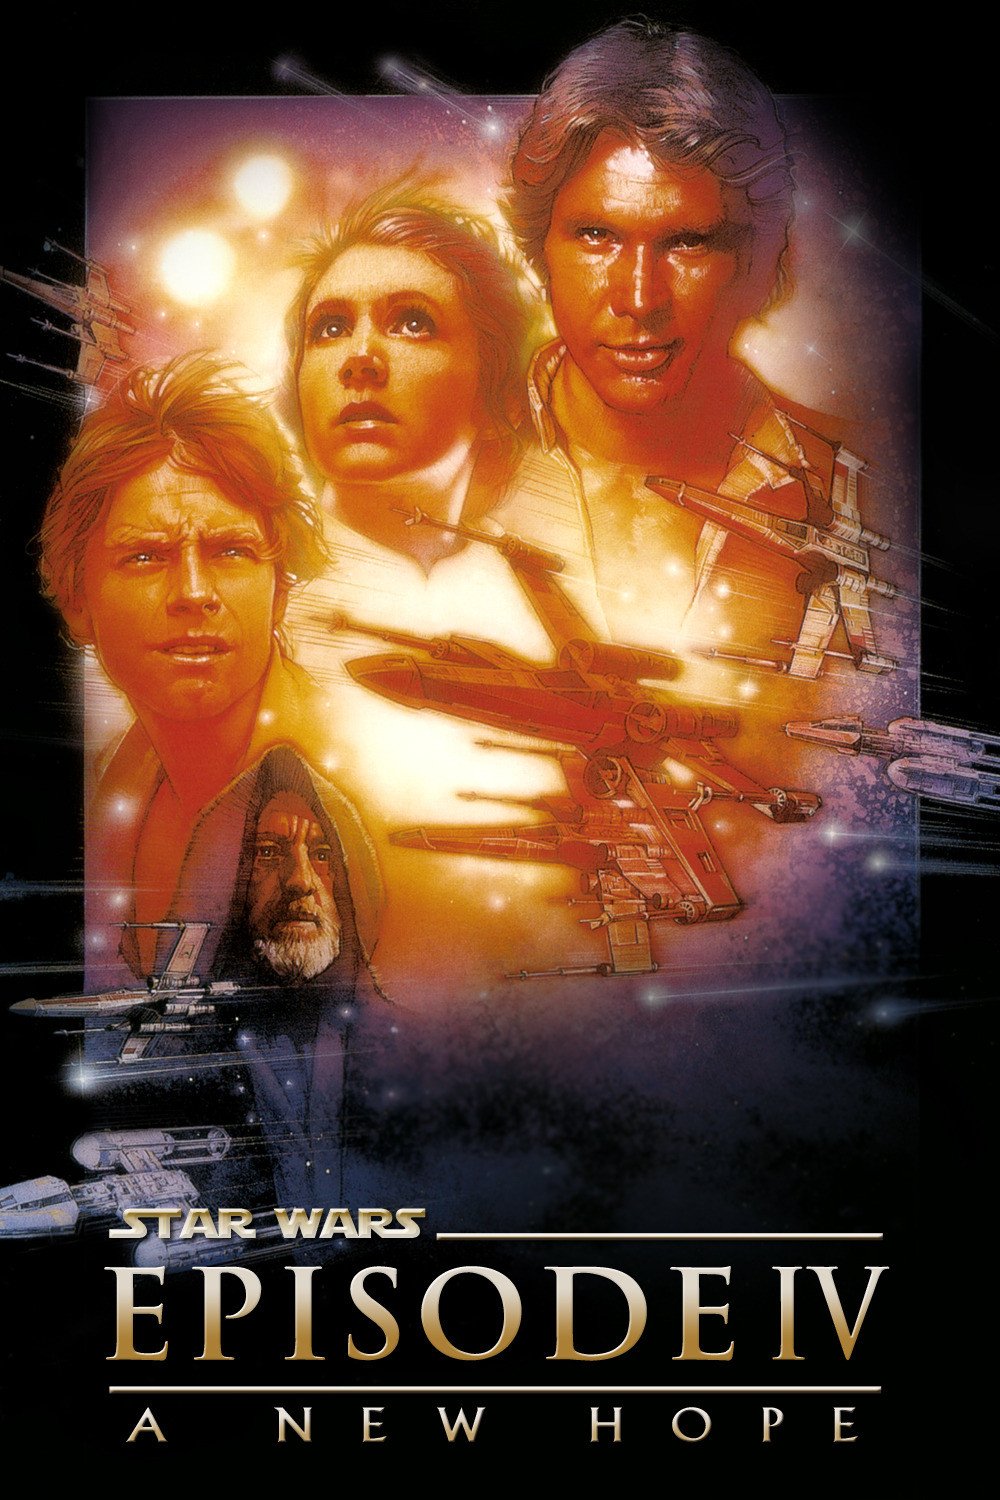 Poster of the movie Star Wars: Episode IV - A New Hope